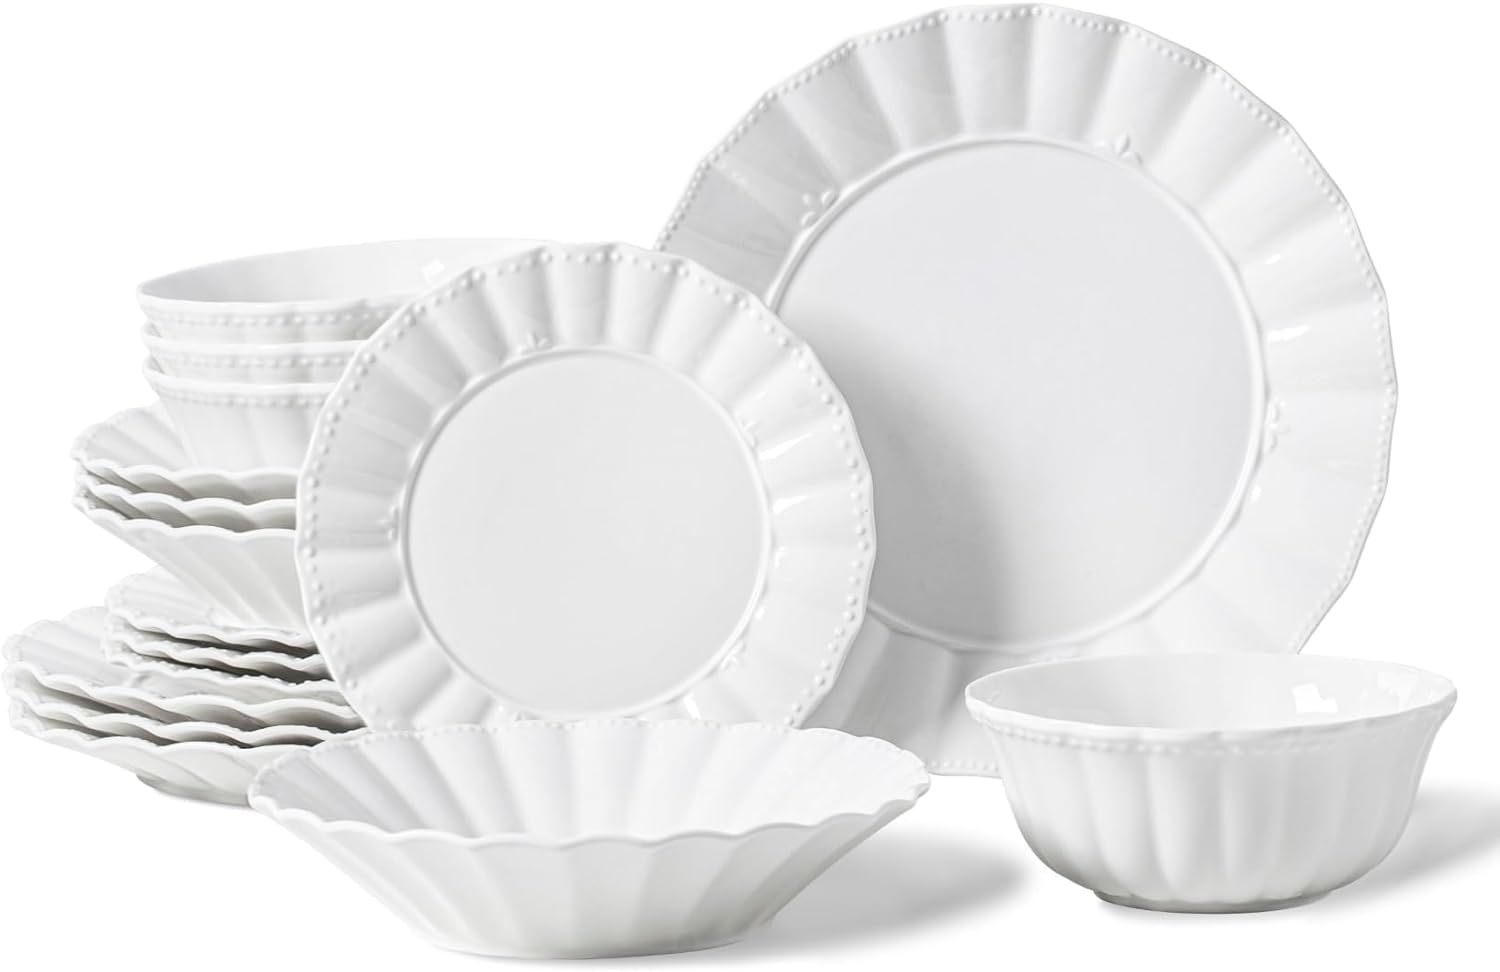 Plates and Bowls Sets, 16 Piece Dinnerware Sets, Porcelain Dinner Set with Plates and Bowls, Cera... | Amazon (US)